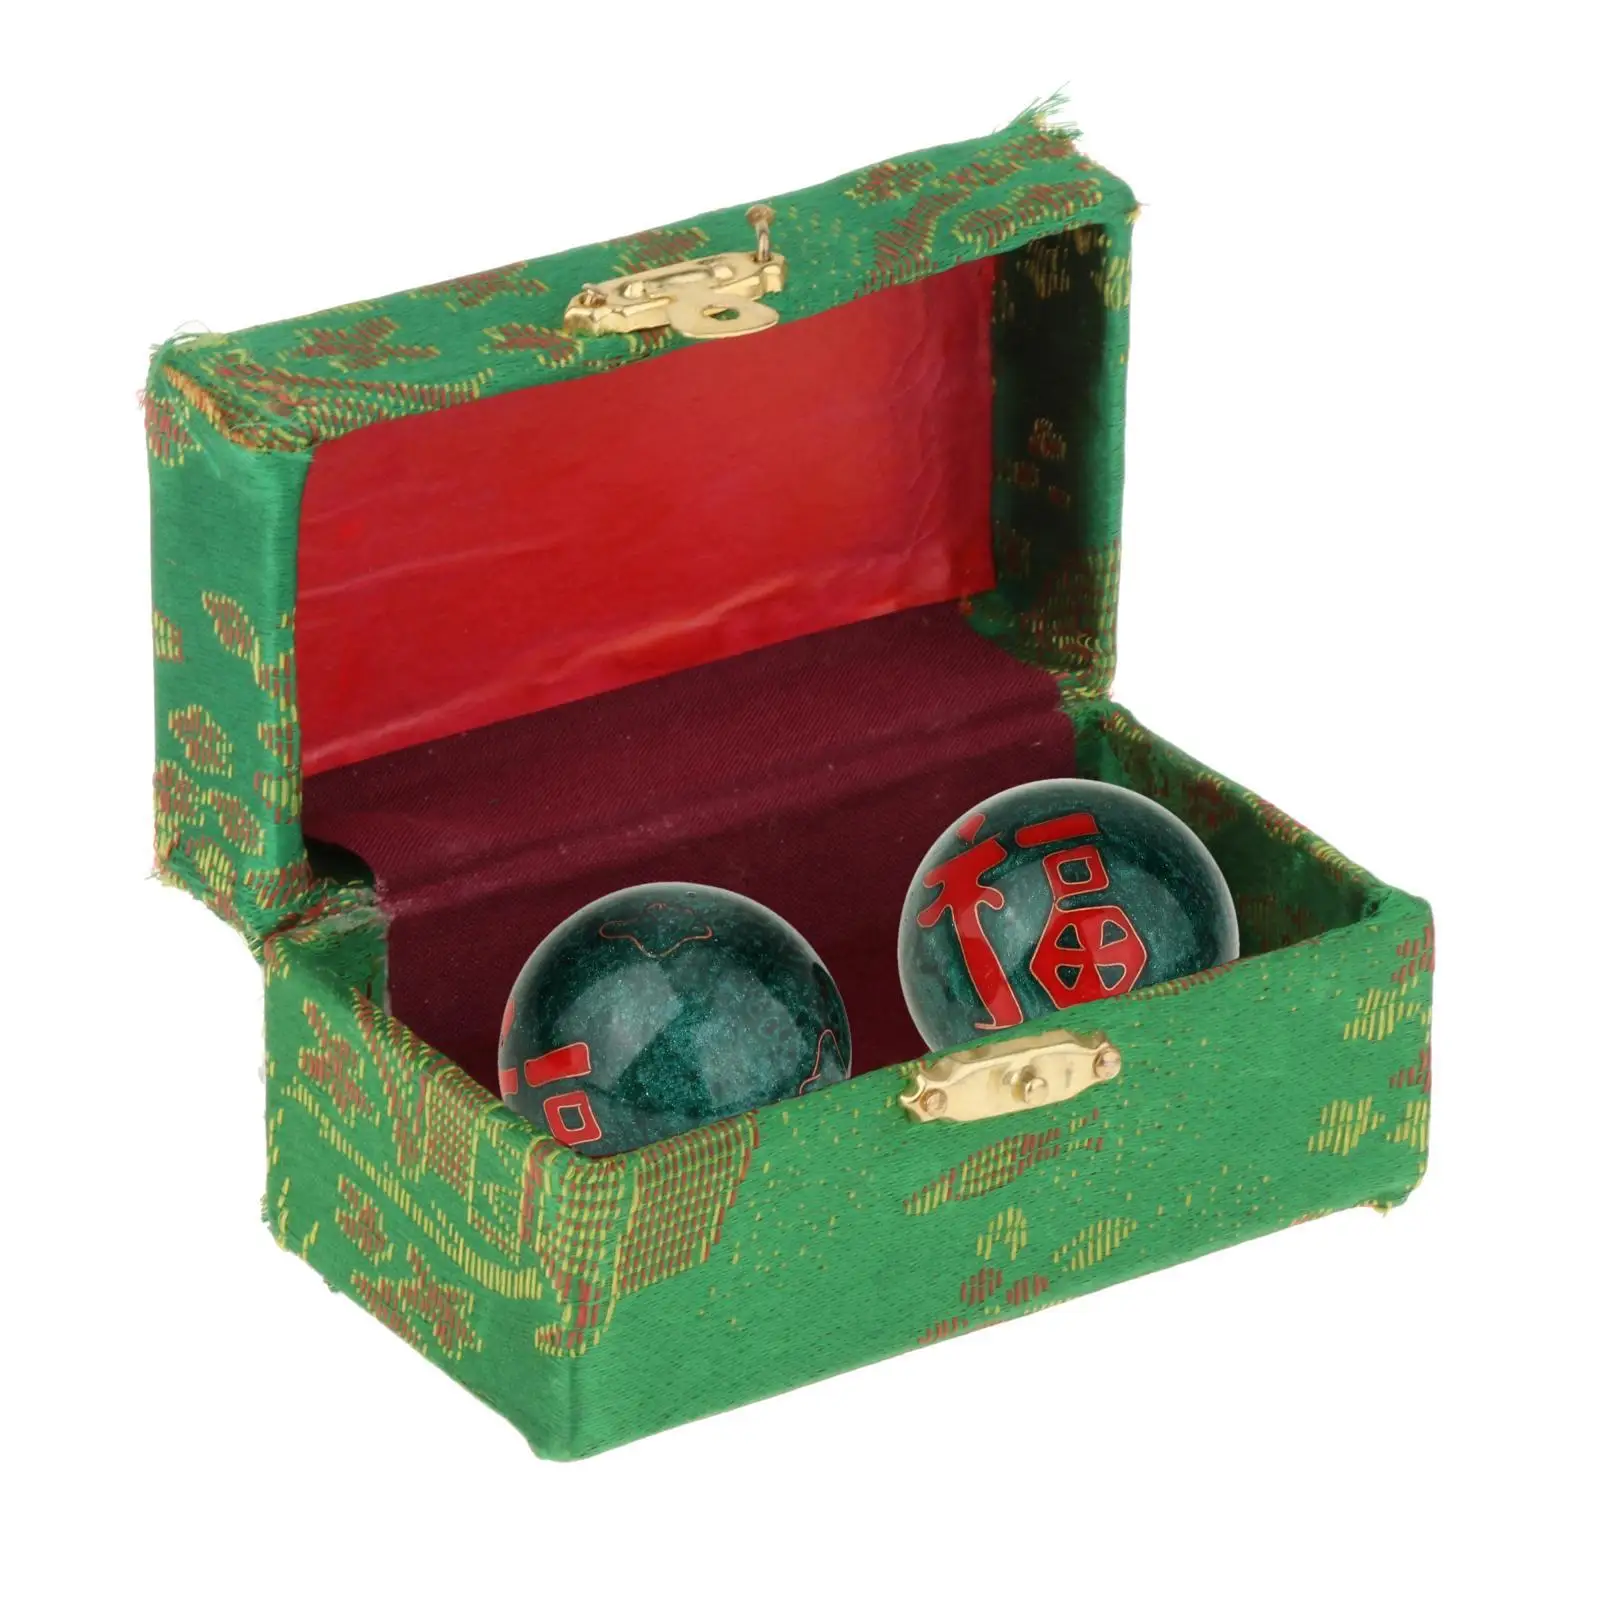 2 Pieces Hand Massage Balls with Storage Box Gift Baoding Balls for Parents